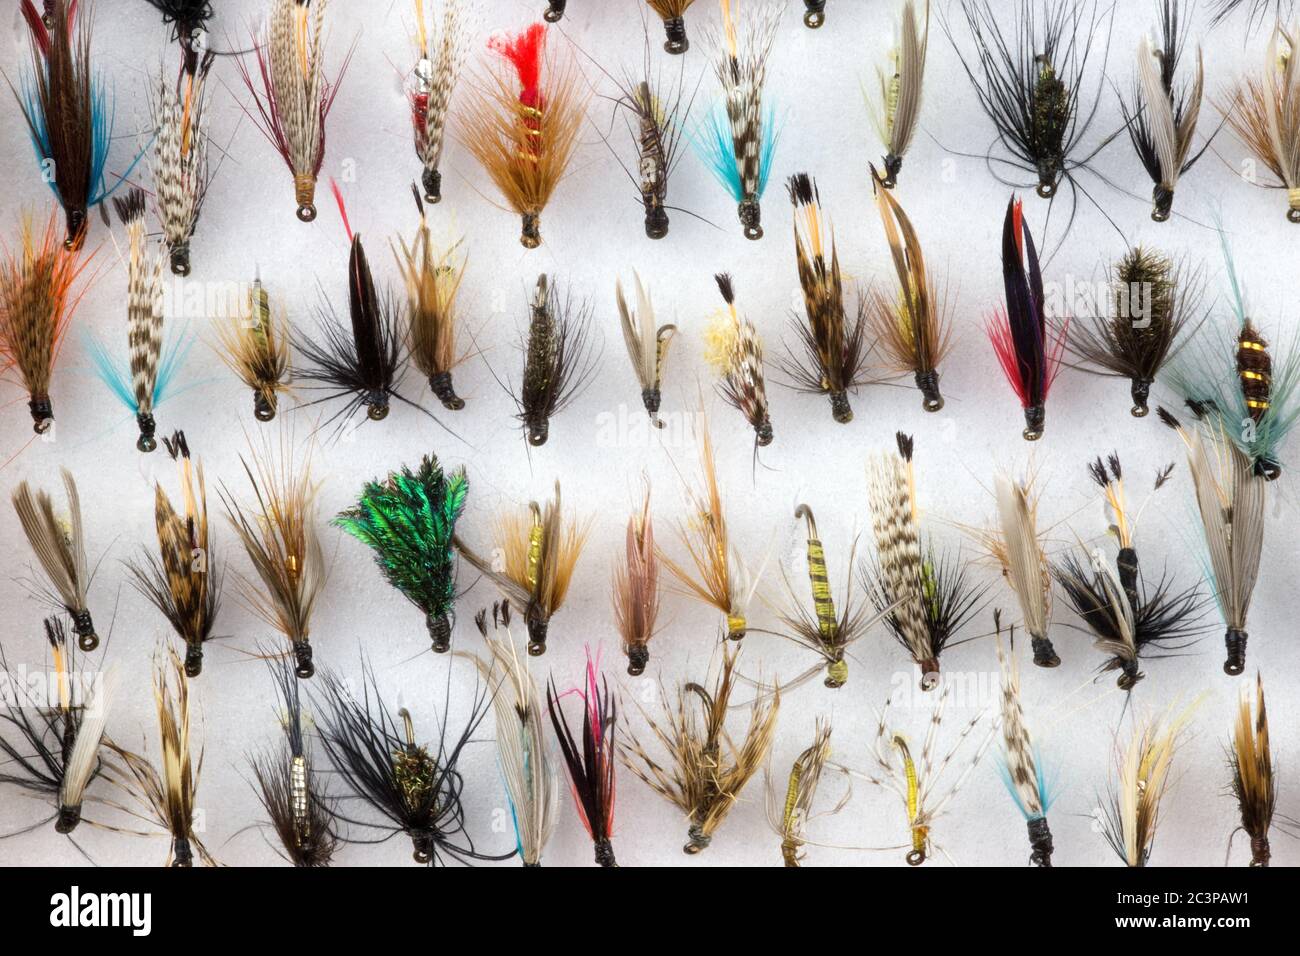 https://c8.alamy.com/comp/2C3PAW1/selection-of-trout-fishing-flies-in-a-white-foam-fly-box-2C3PAW1.jpg